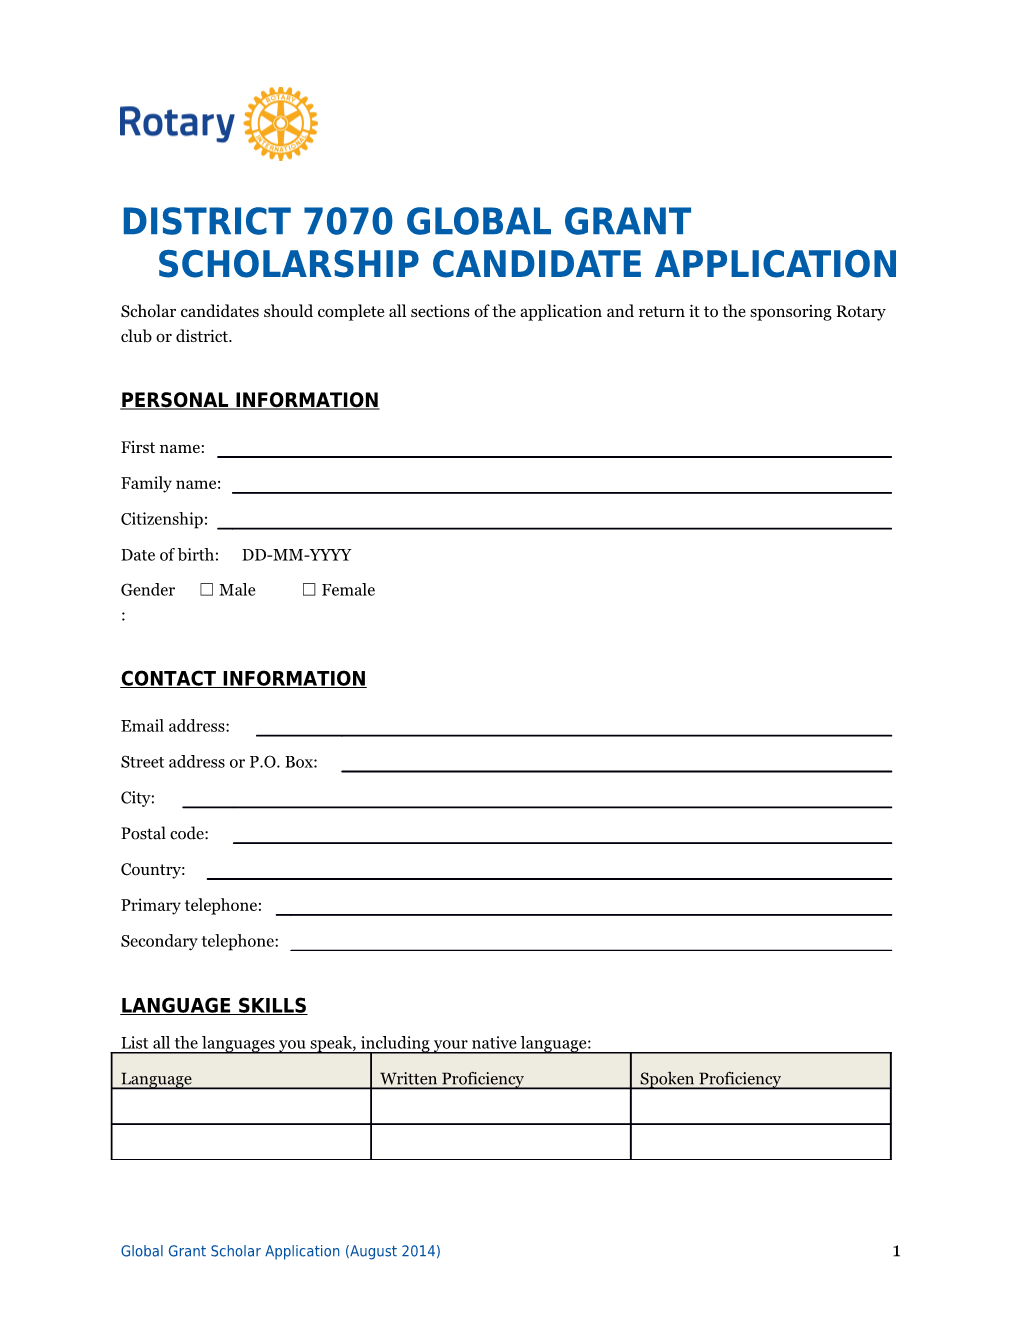 DISTRICT 7070 Global Grant Scholarship CANDIDATE Application